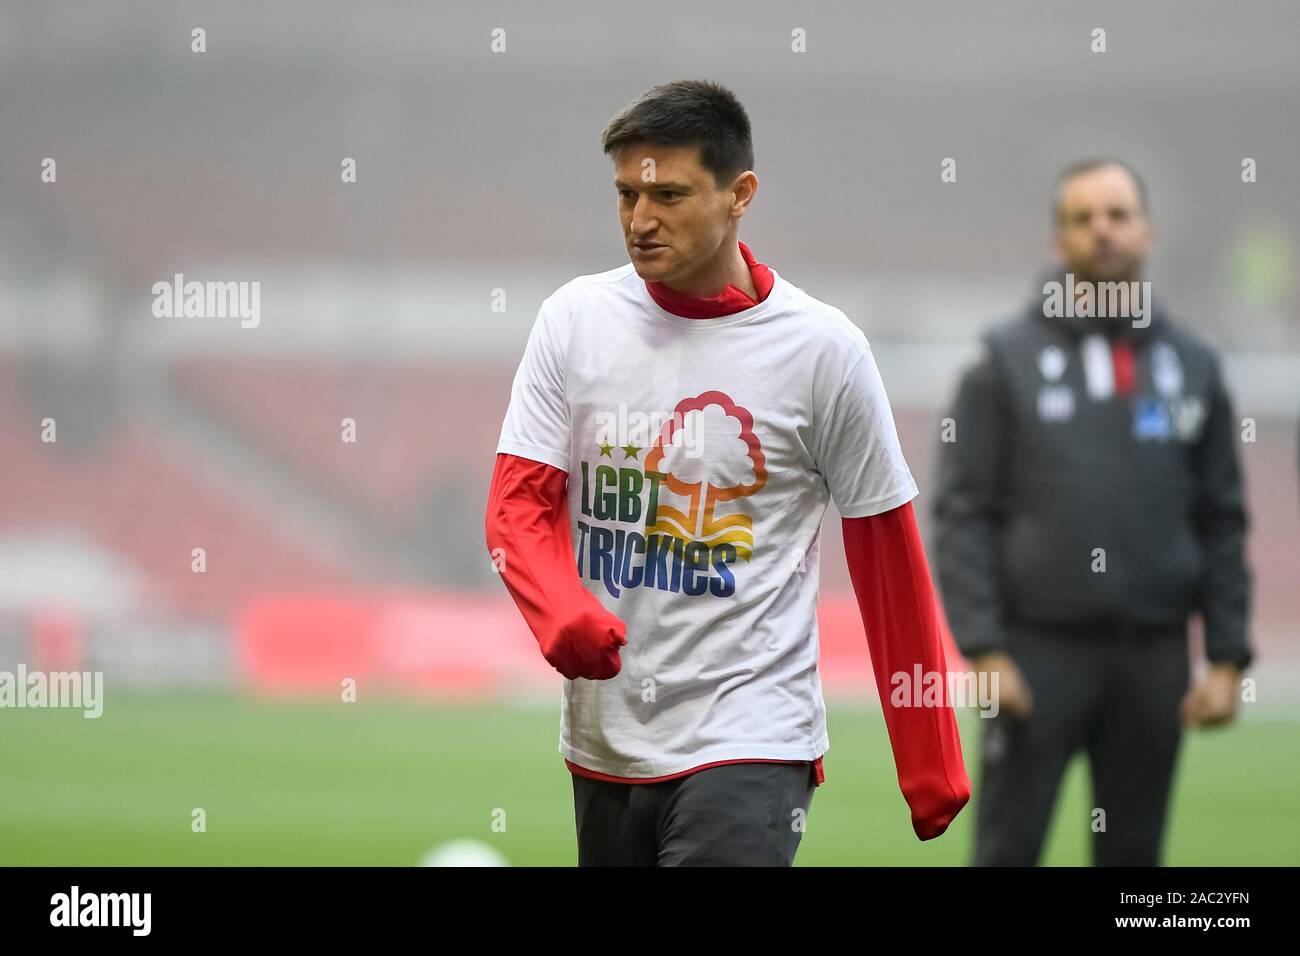 Nottingham, UK. 30th Nov, 2019. Joe Lolley (23) of Nottingham Forest warms up with LBGT Trickies logo, showing support for the LBGT community during the Sky Bet Championship match between Nottingham Forest and Cardiff City at the City Ground, Nottingham on Saturday 30th November 2019. (Credit: Jon Hobley | MI News) Photograph may only be used for newspaper and/or magazine editorial purposes, license required for commercial use Credit: MI News & Sport /Alamy Live News Credit: MI News & Sport /Alamy Live News Credit: MI News & Sport /Alamy Live News Stock Photo